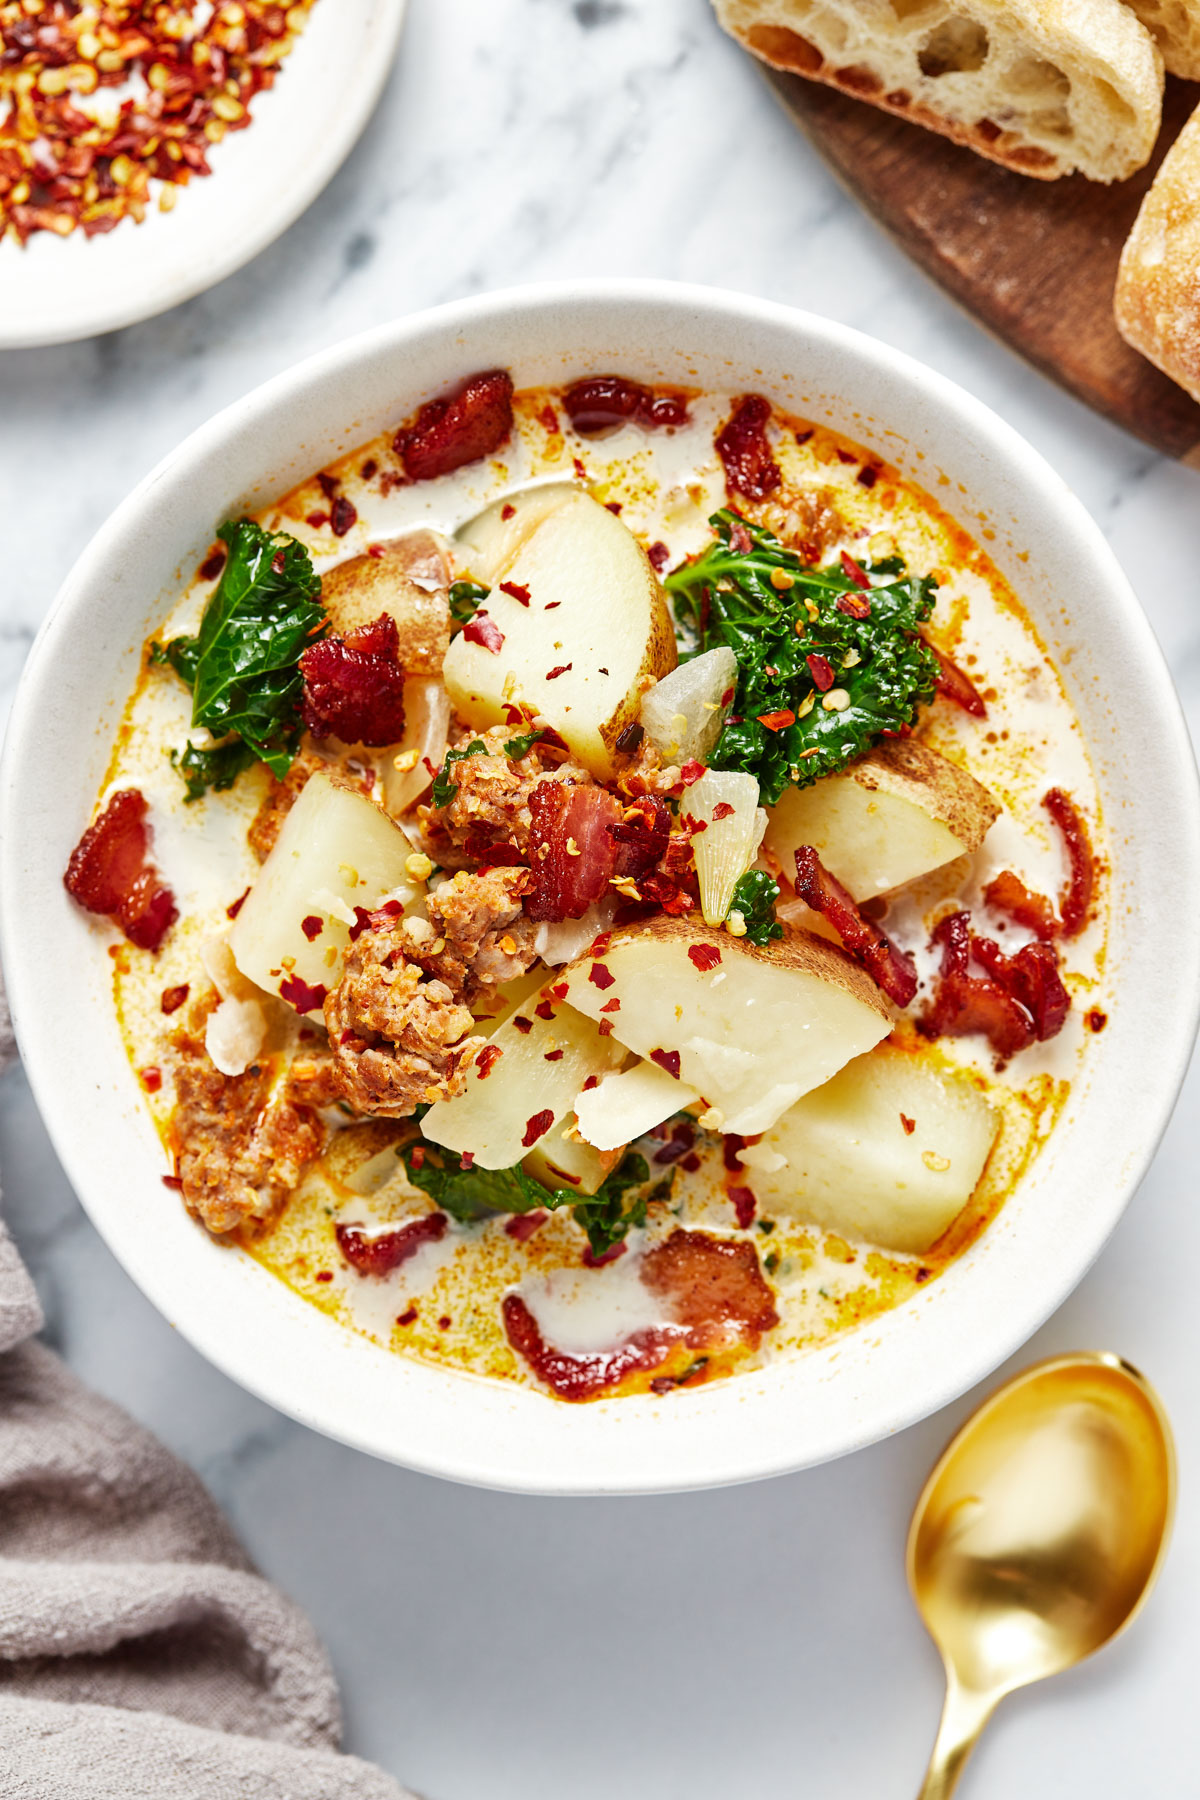 A bowl of zuppa toscana with red chili flakes and bread on the side.